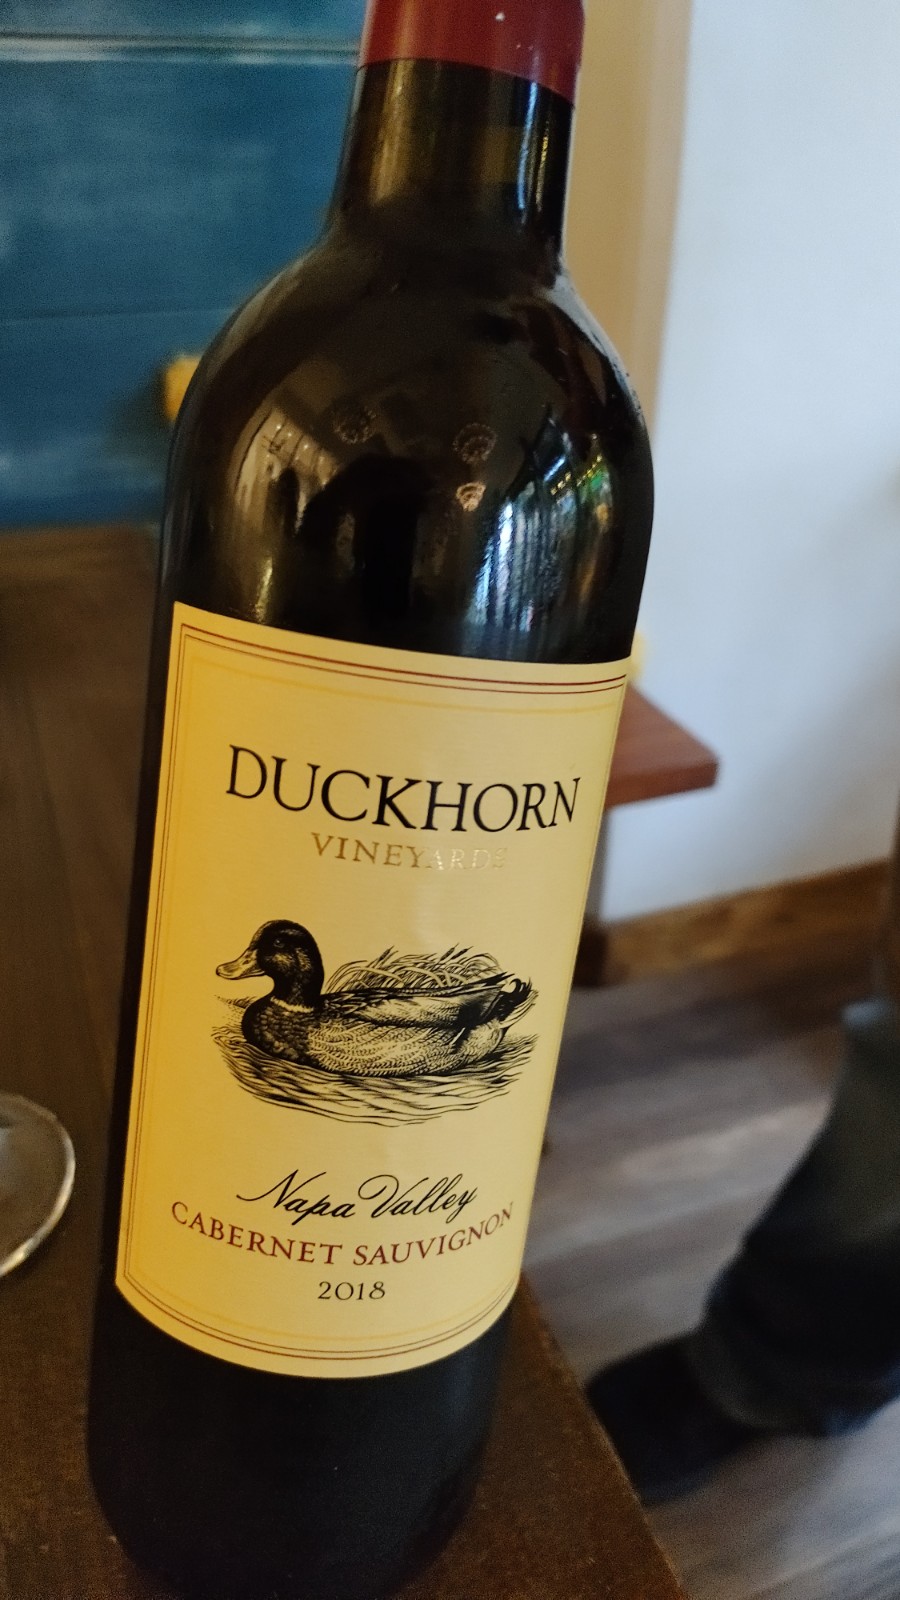 picture of the wine bottle from Duckhorn vineyard